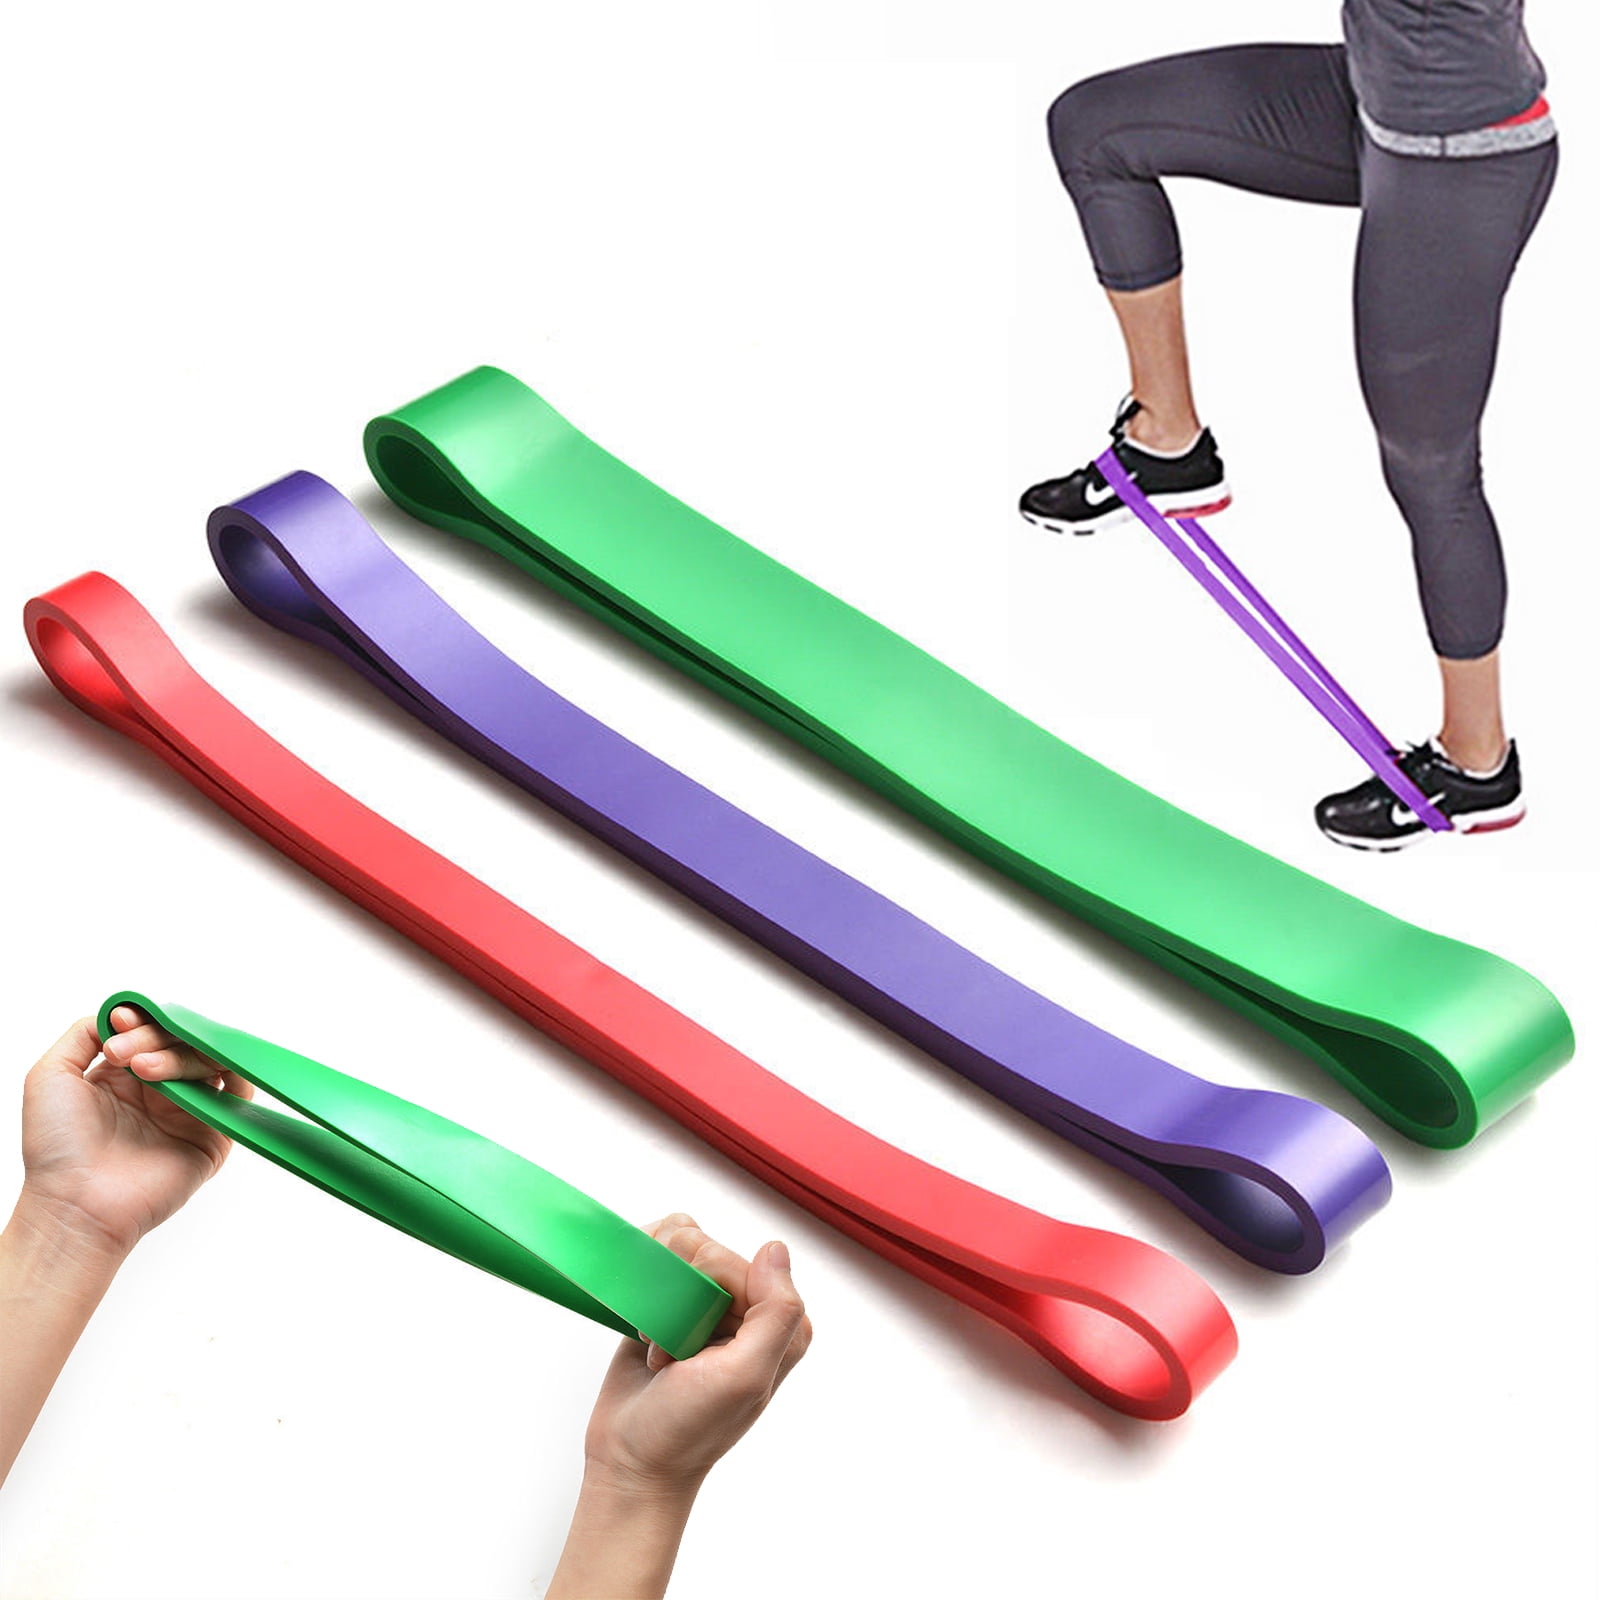 Booty Resistance Bands for any Workout- Set of 3 Bands - Walmart.com ...